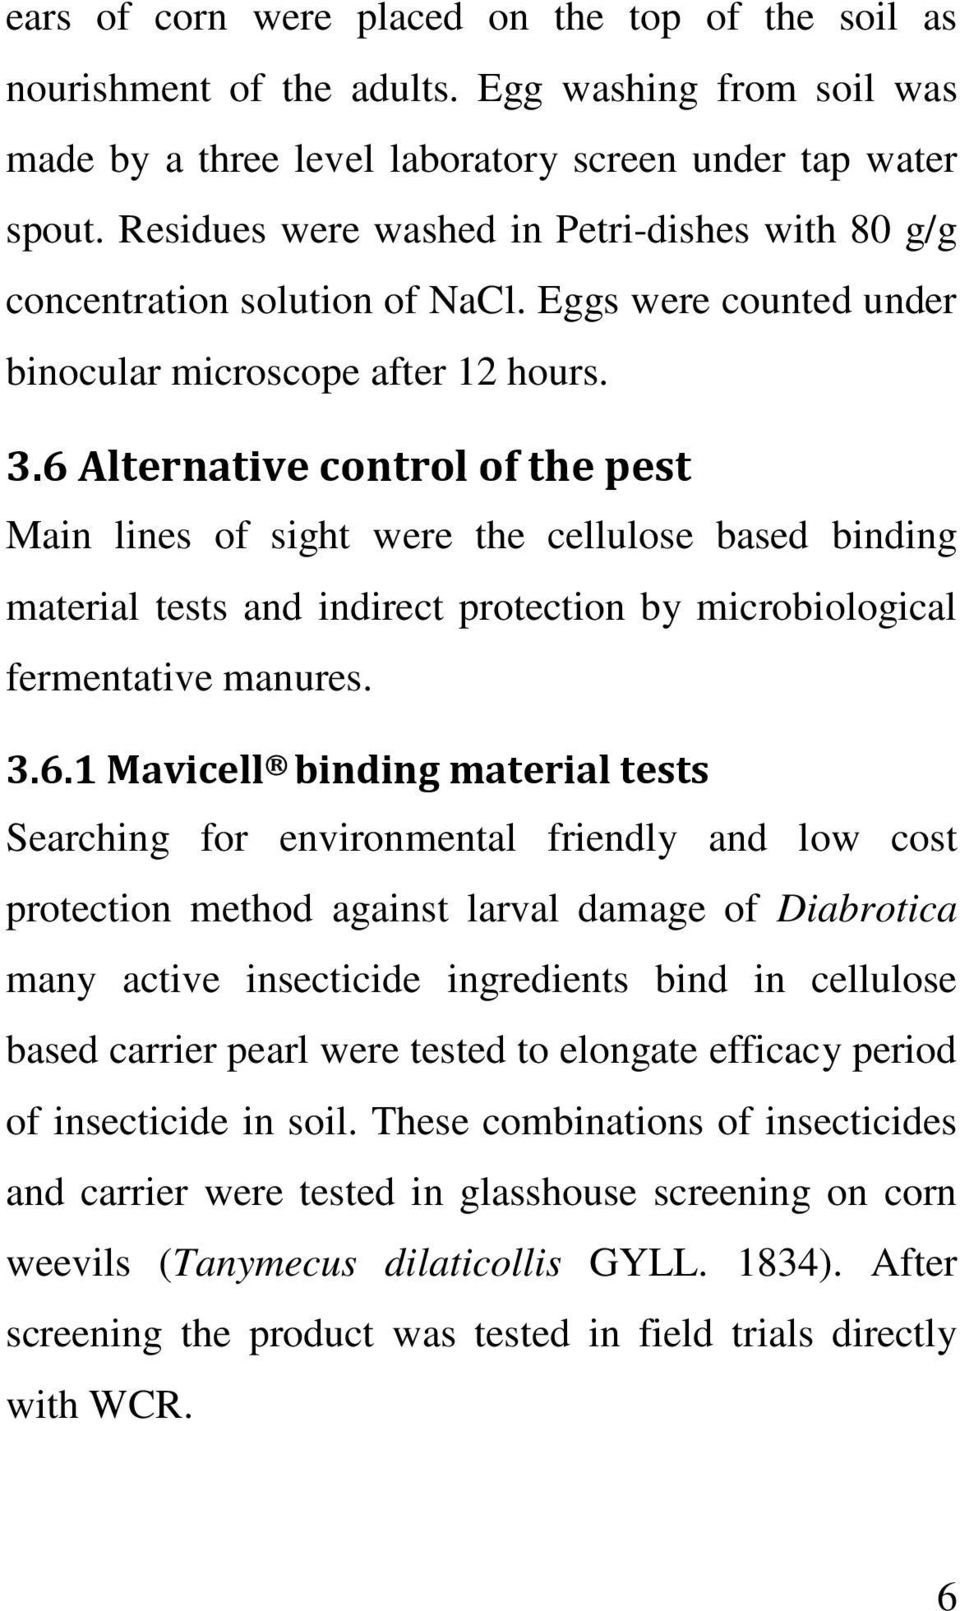 6 Alternative control of the pest Main lines of sight were the cellulose based binding material tests and indirect protection by microbiological fermentative manures. 3.6.1 Mavicell binding material